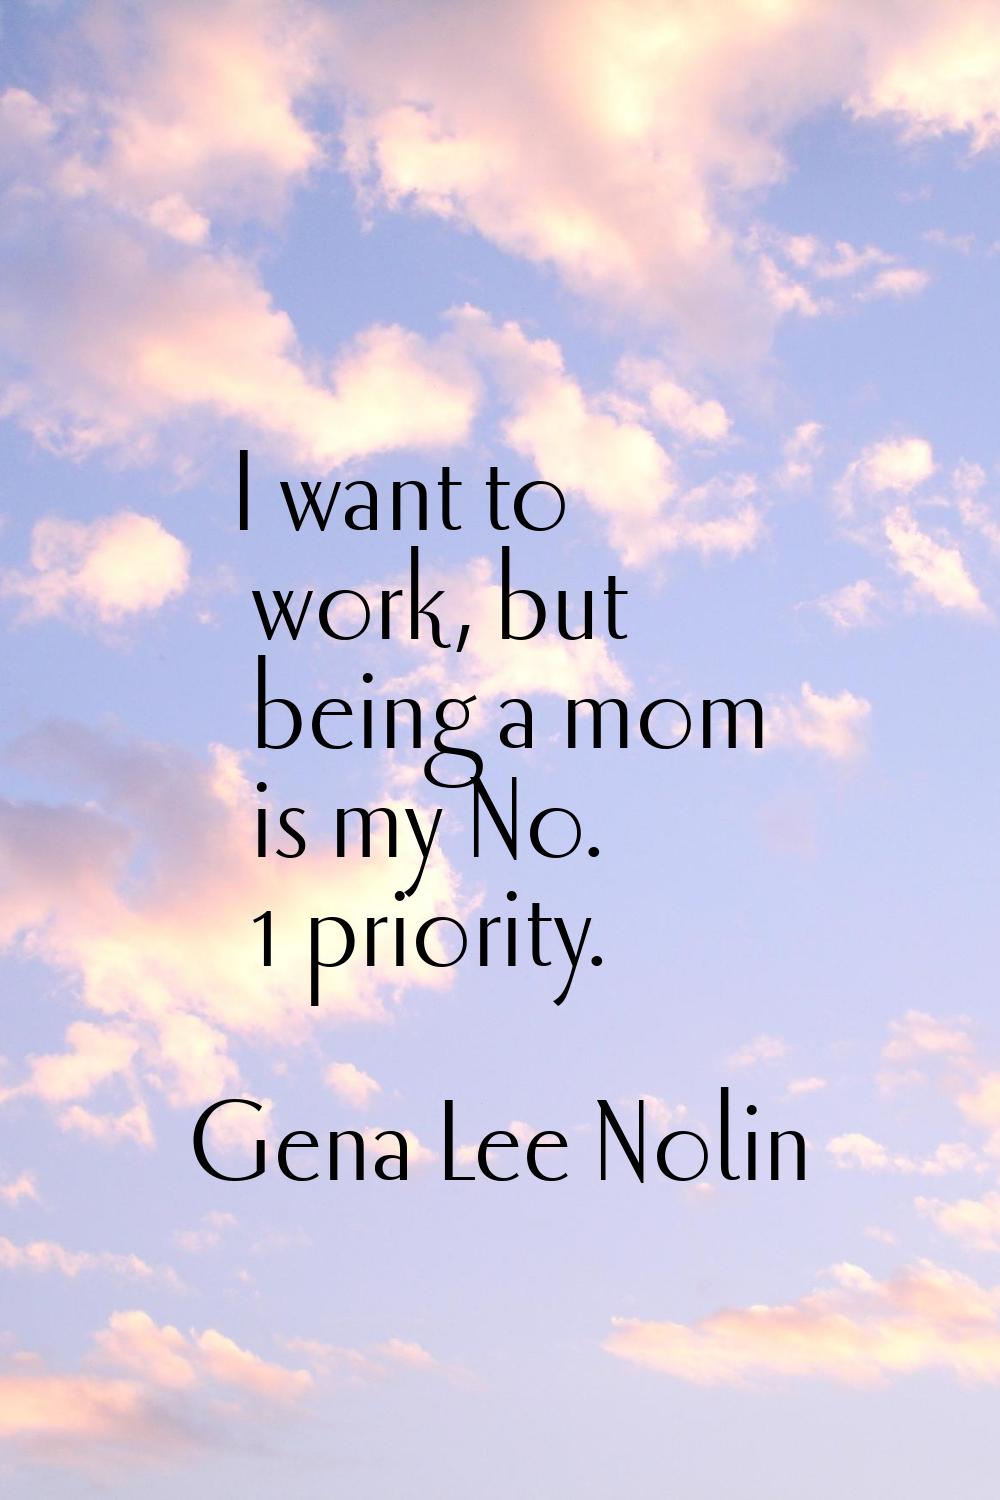 I want to work, but being a mom is my No. 1 priority.